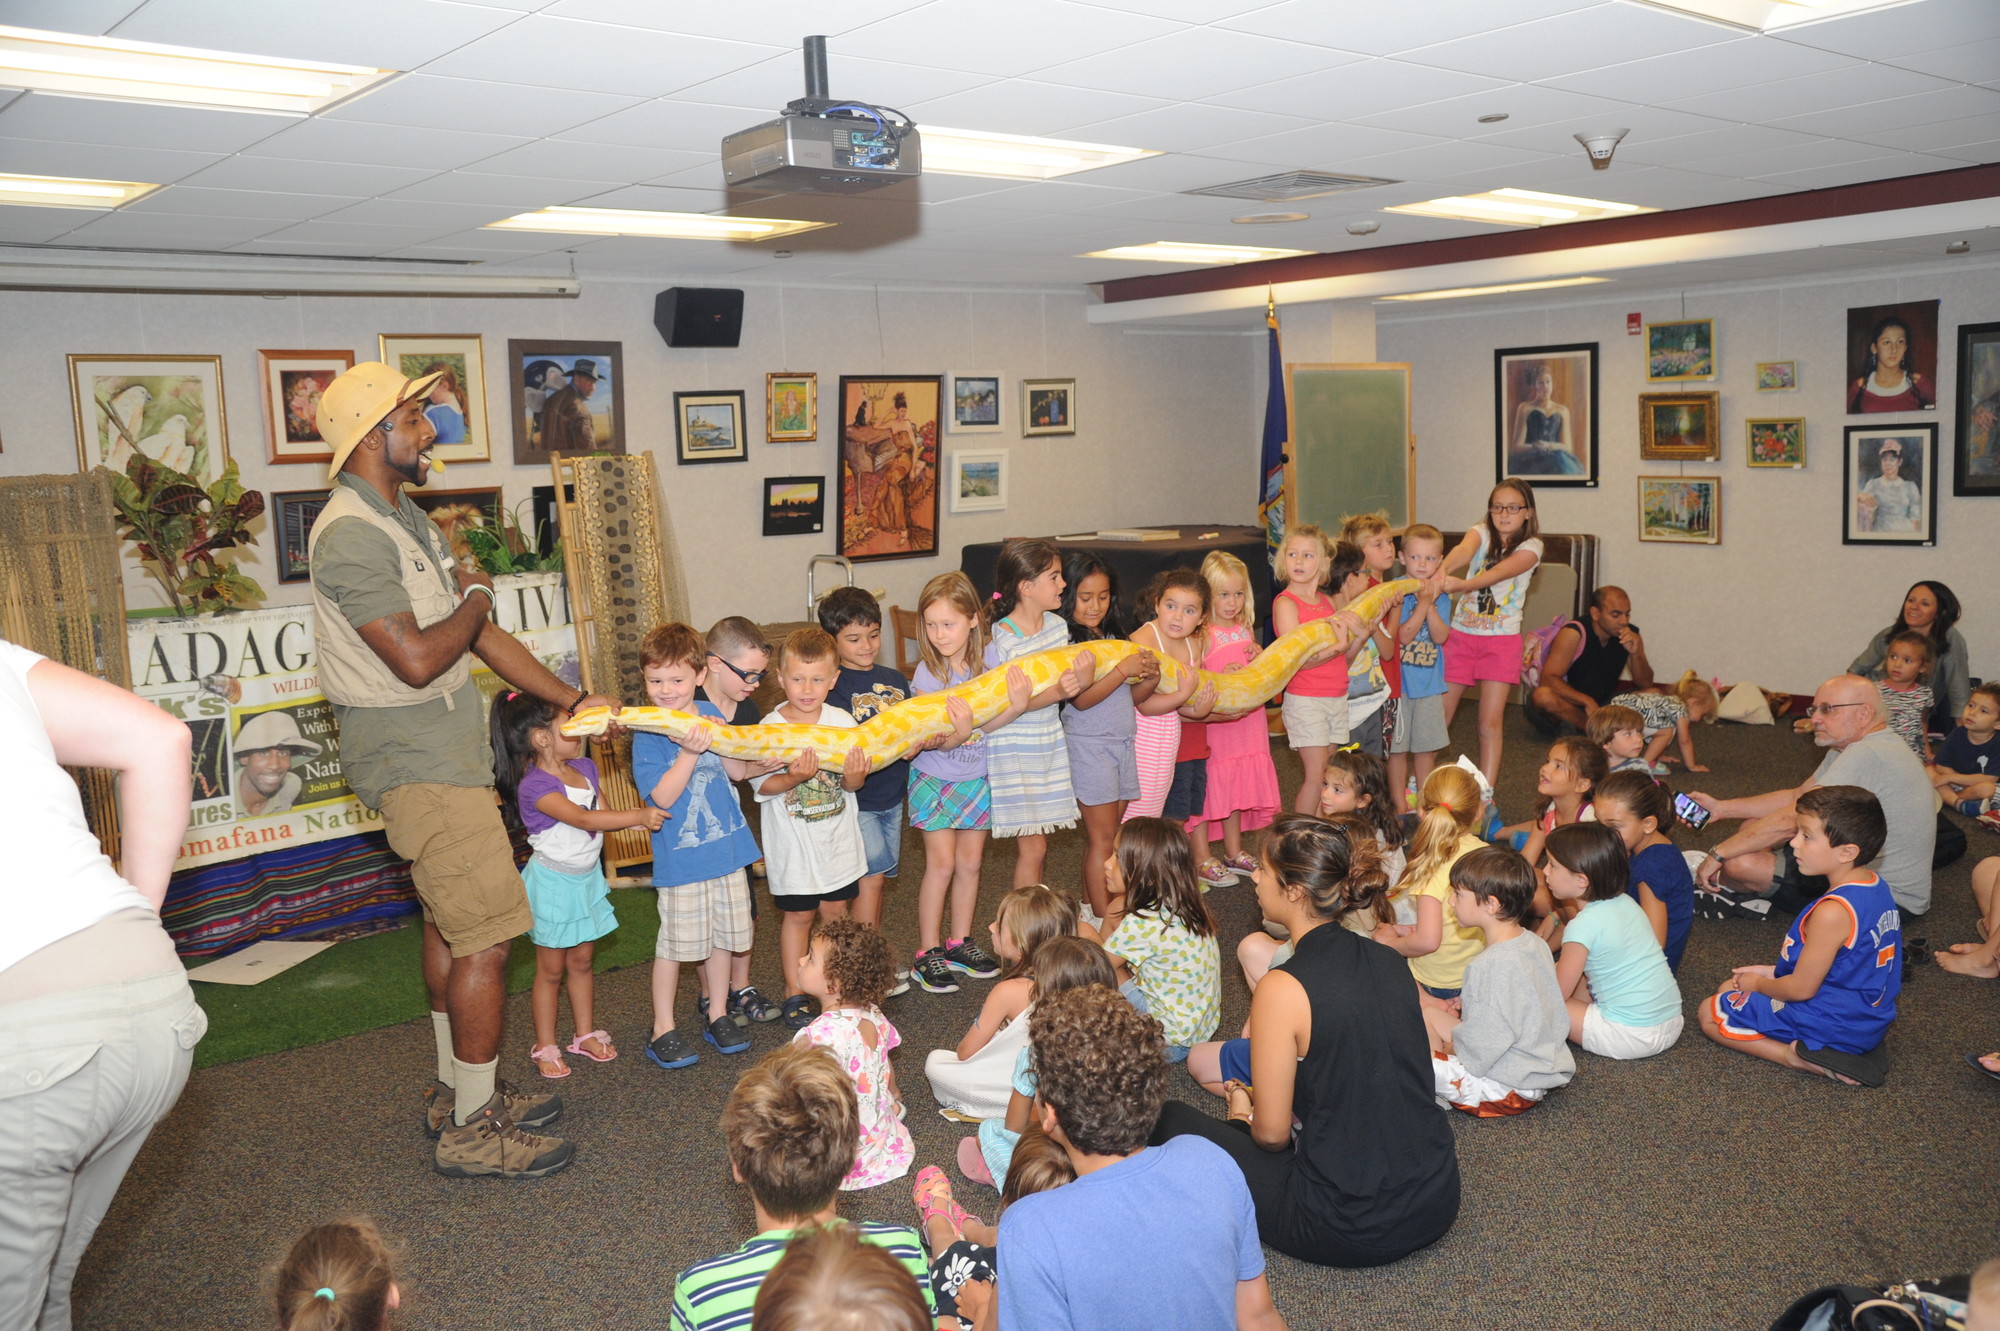 It took 12 brave volunteers to hold the large snake that Erik Callendar brought to the Rockville Centre Public Library.